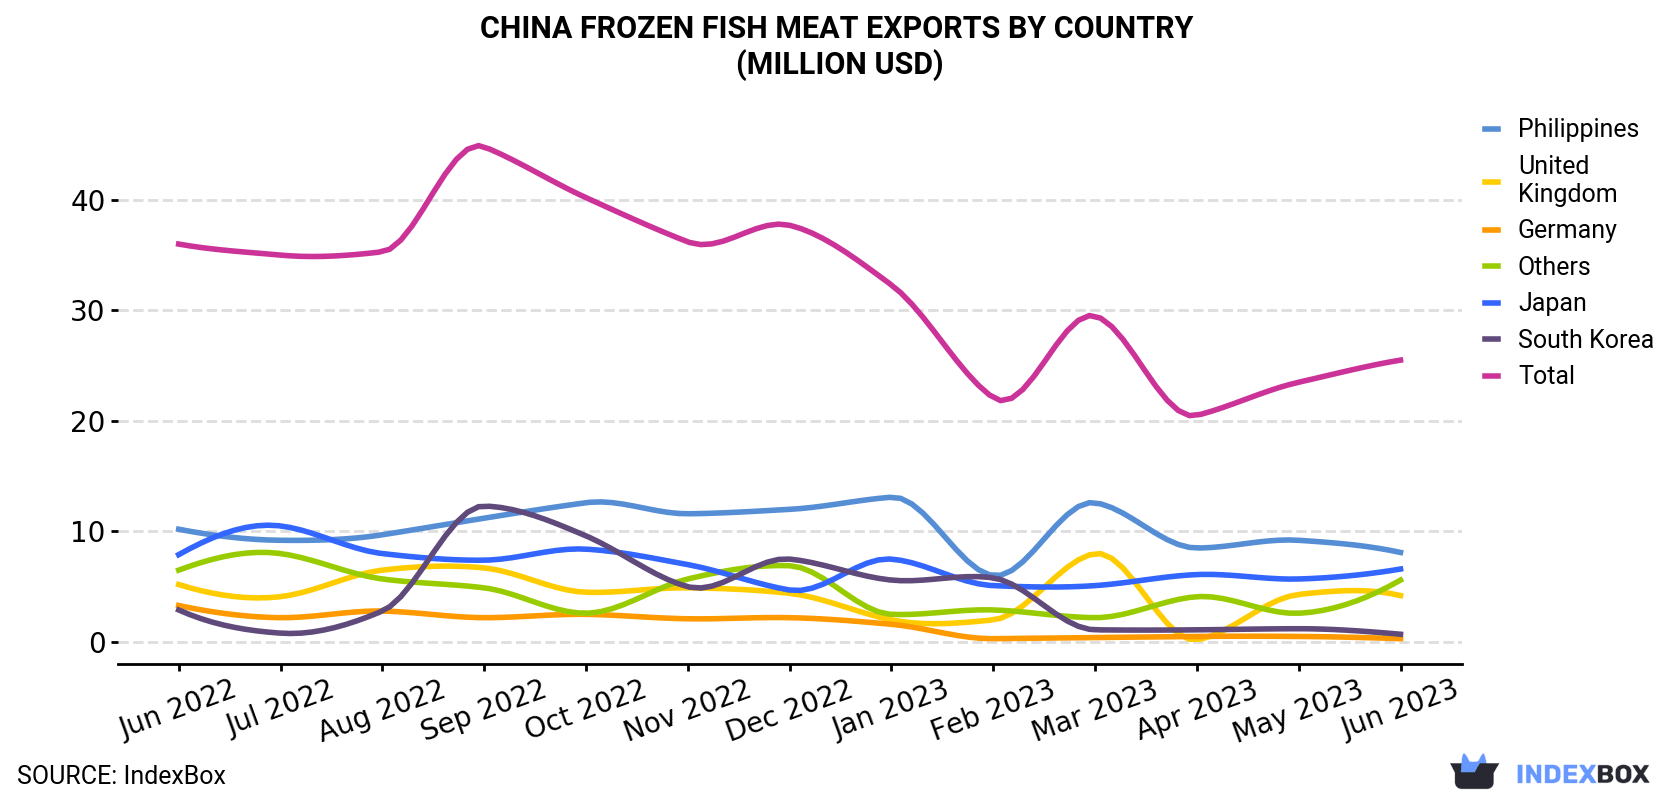 China Frozen Fish Meat Exports By Country (Million USD)